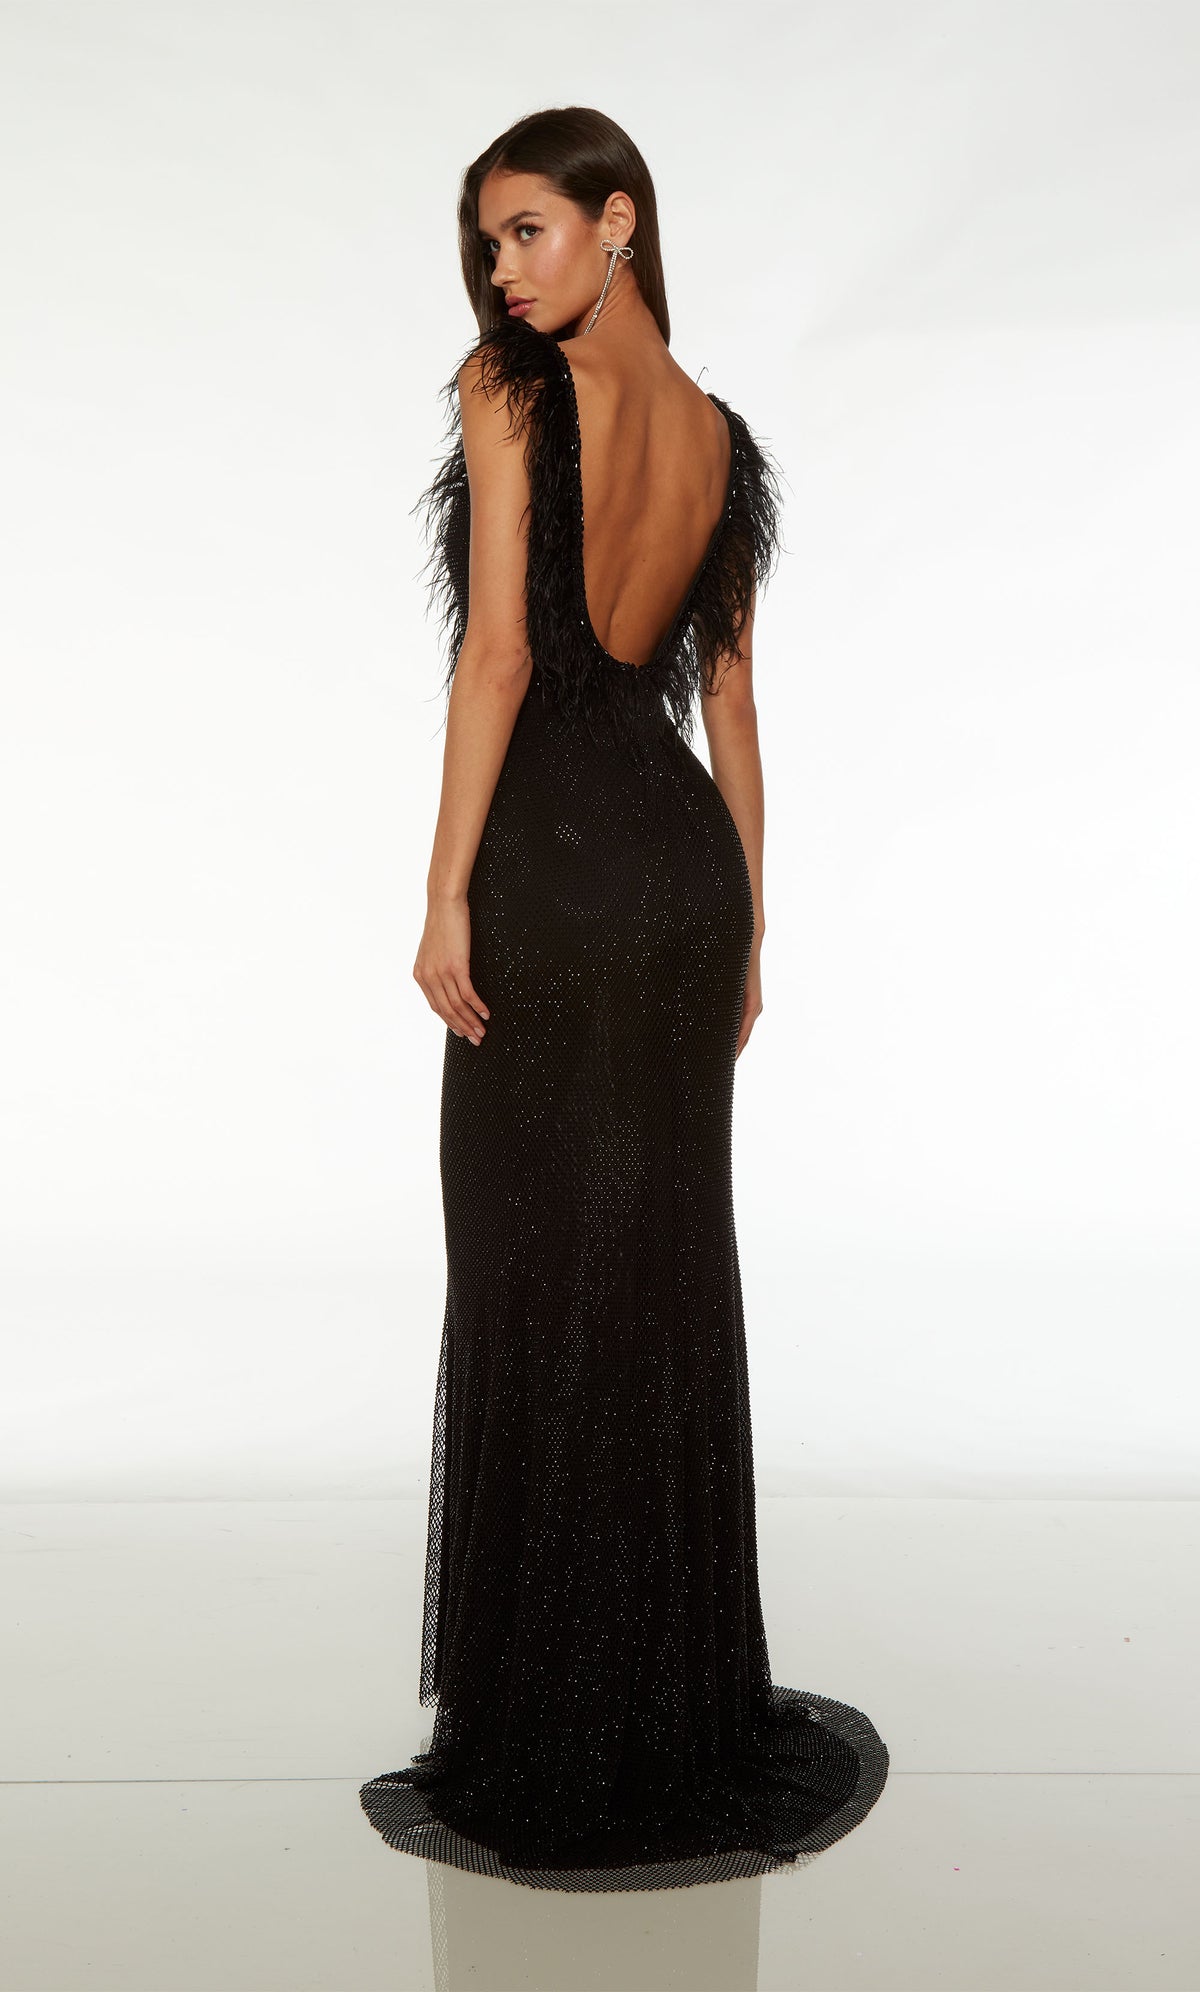 Chic black hotfix prom dress with plunging neckline, low back, train, and exquisite bead and feather trim for added elegance.